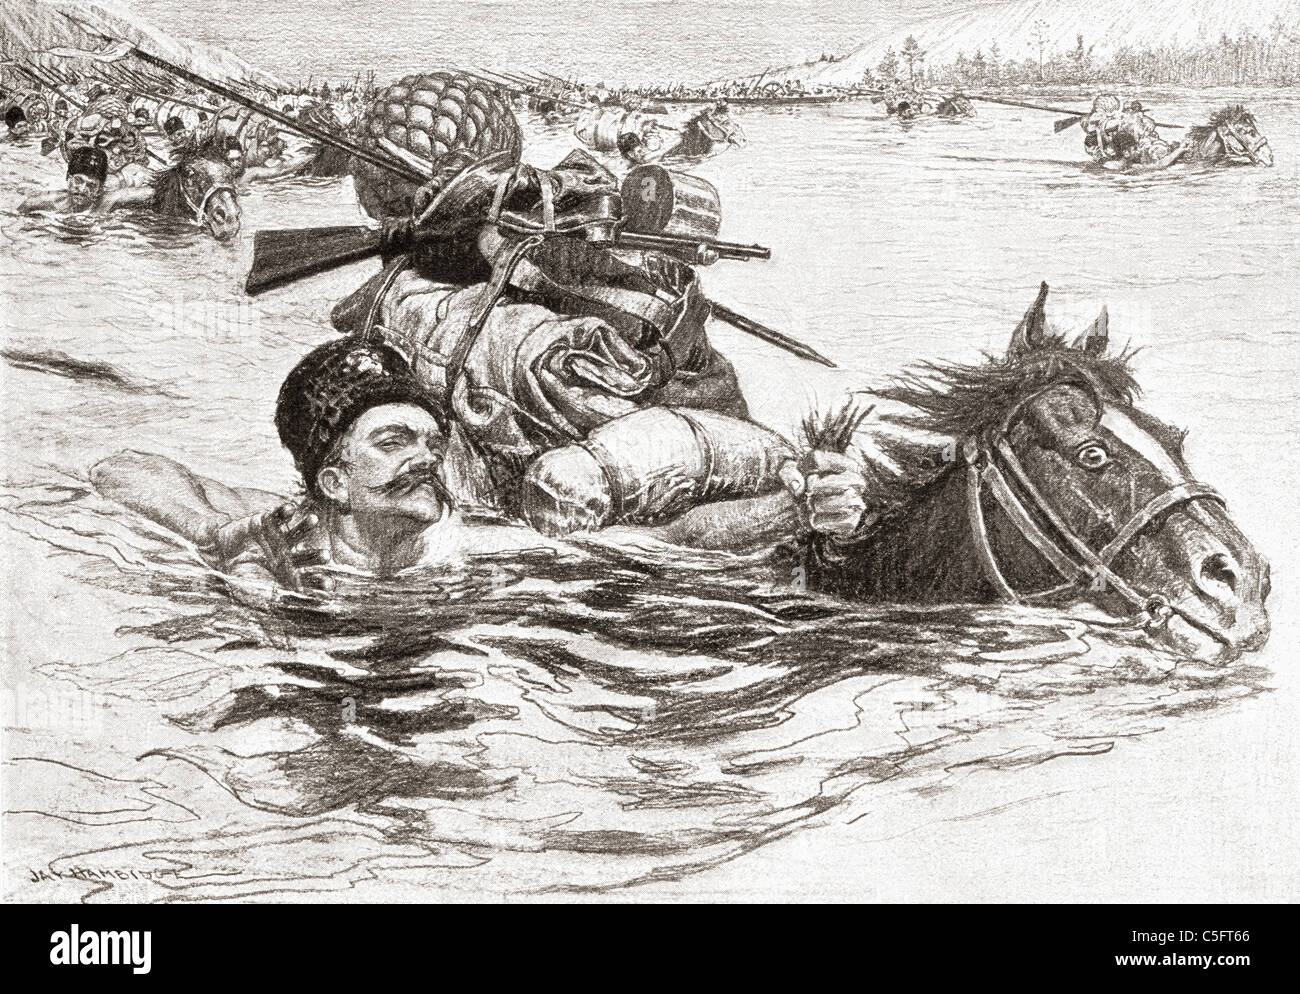 Cossacks swimming their horses across a river. Stock Photo